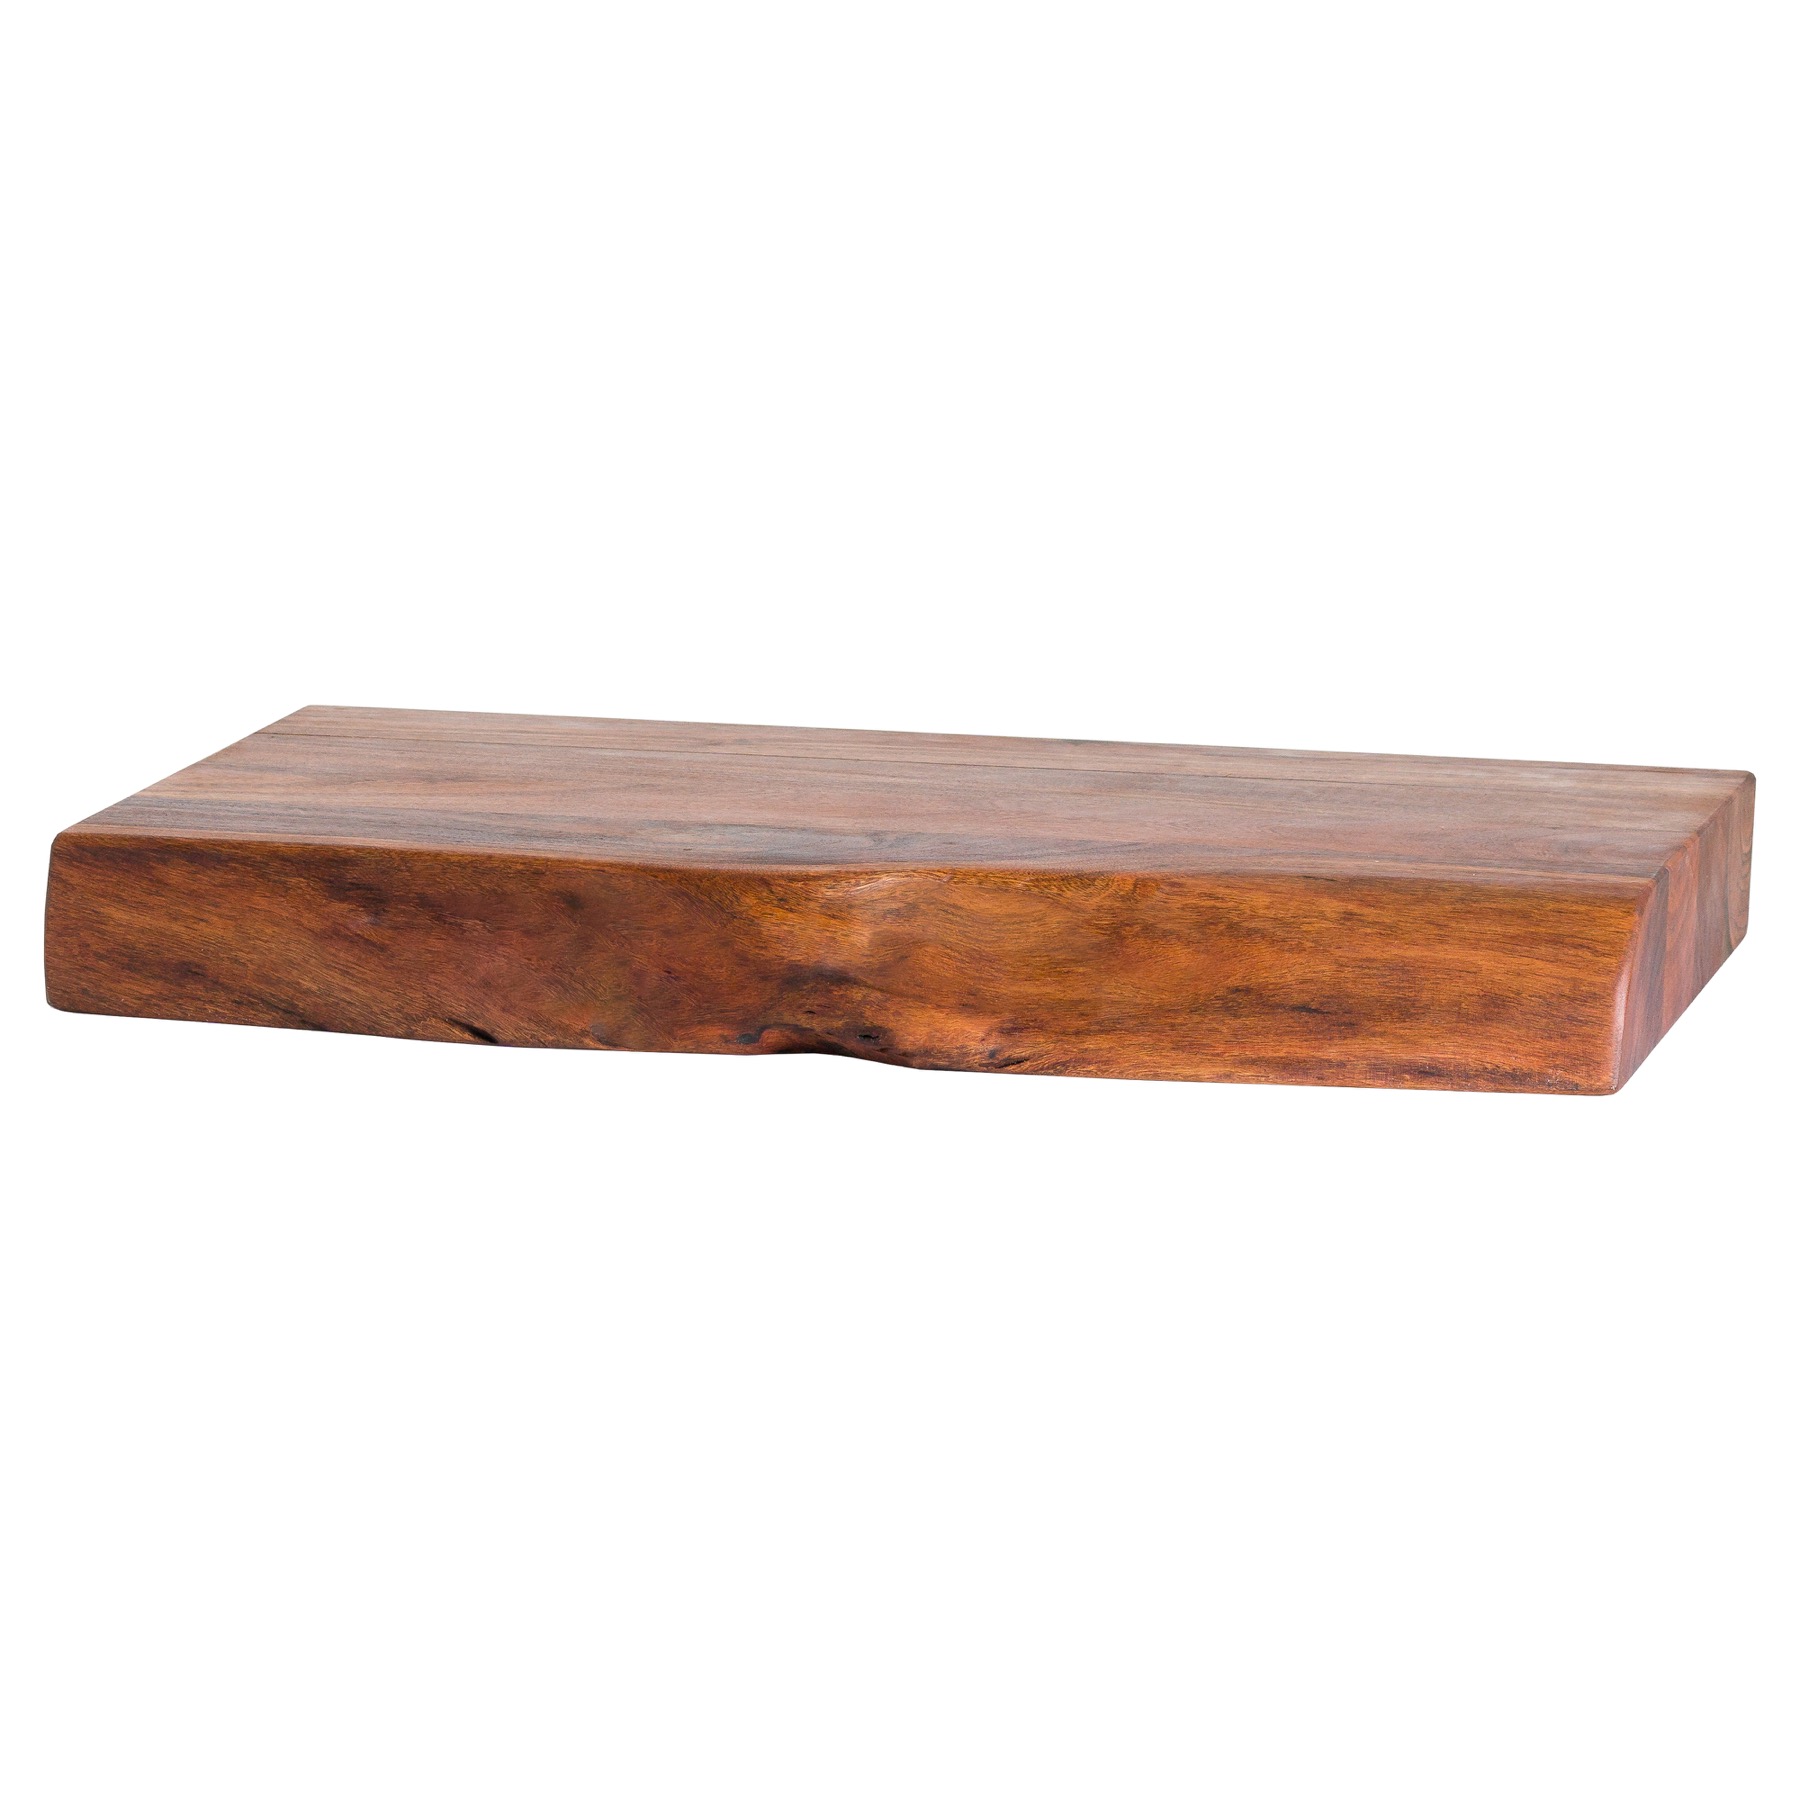 50x30cm Live Edge Collection Wooden Pyman Chopping Board 